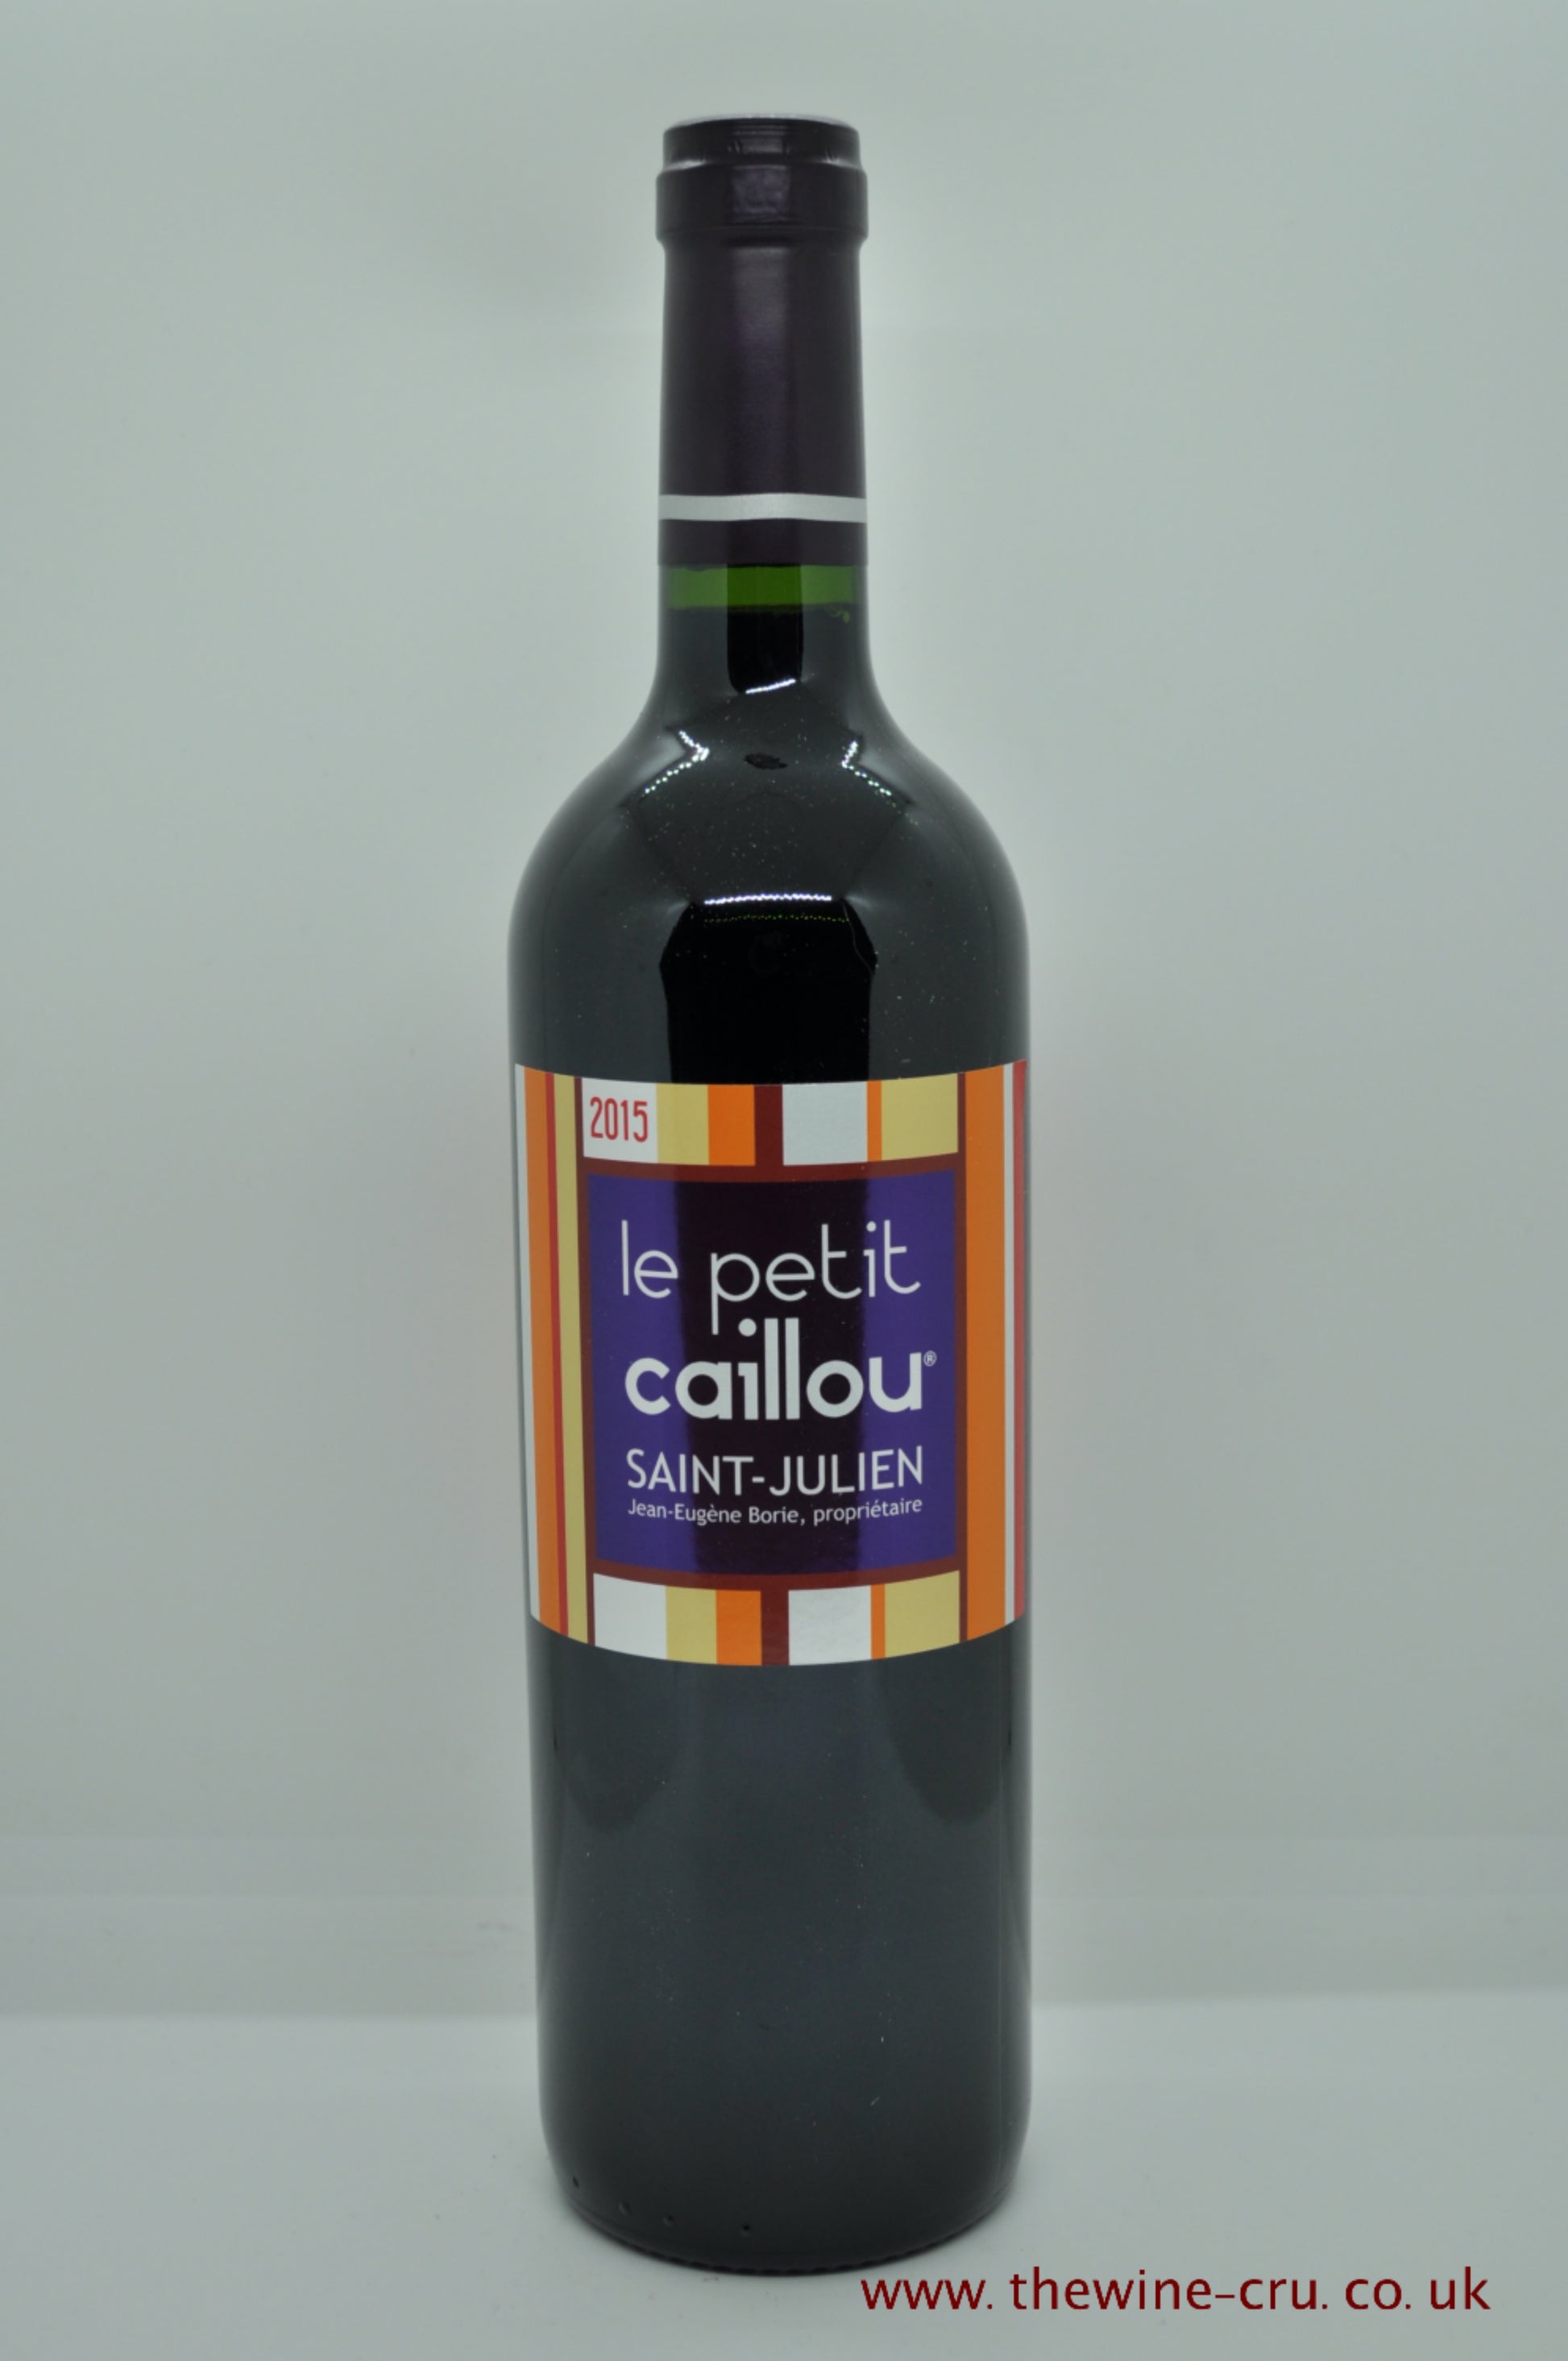 2015 vintage red wine. Le Petit Caillou 2015. France Bordeaux. Immediate delivery. Free local delivery.